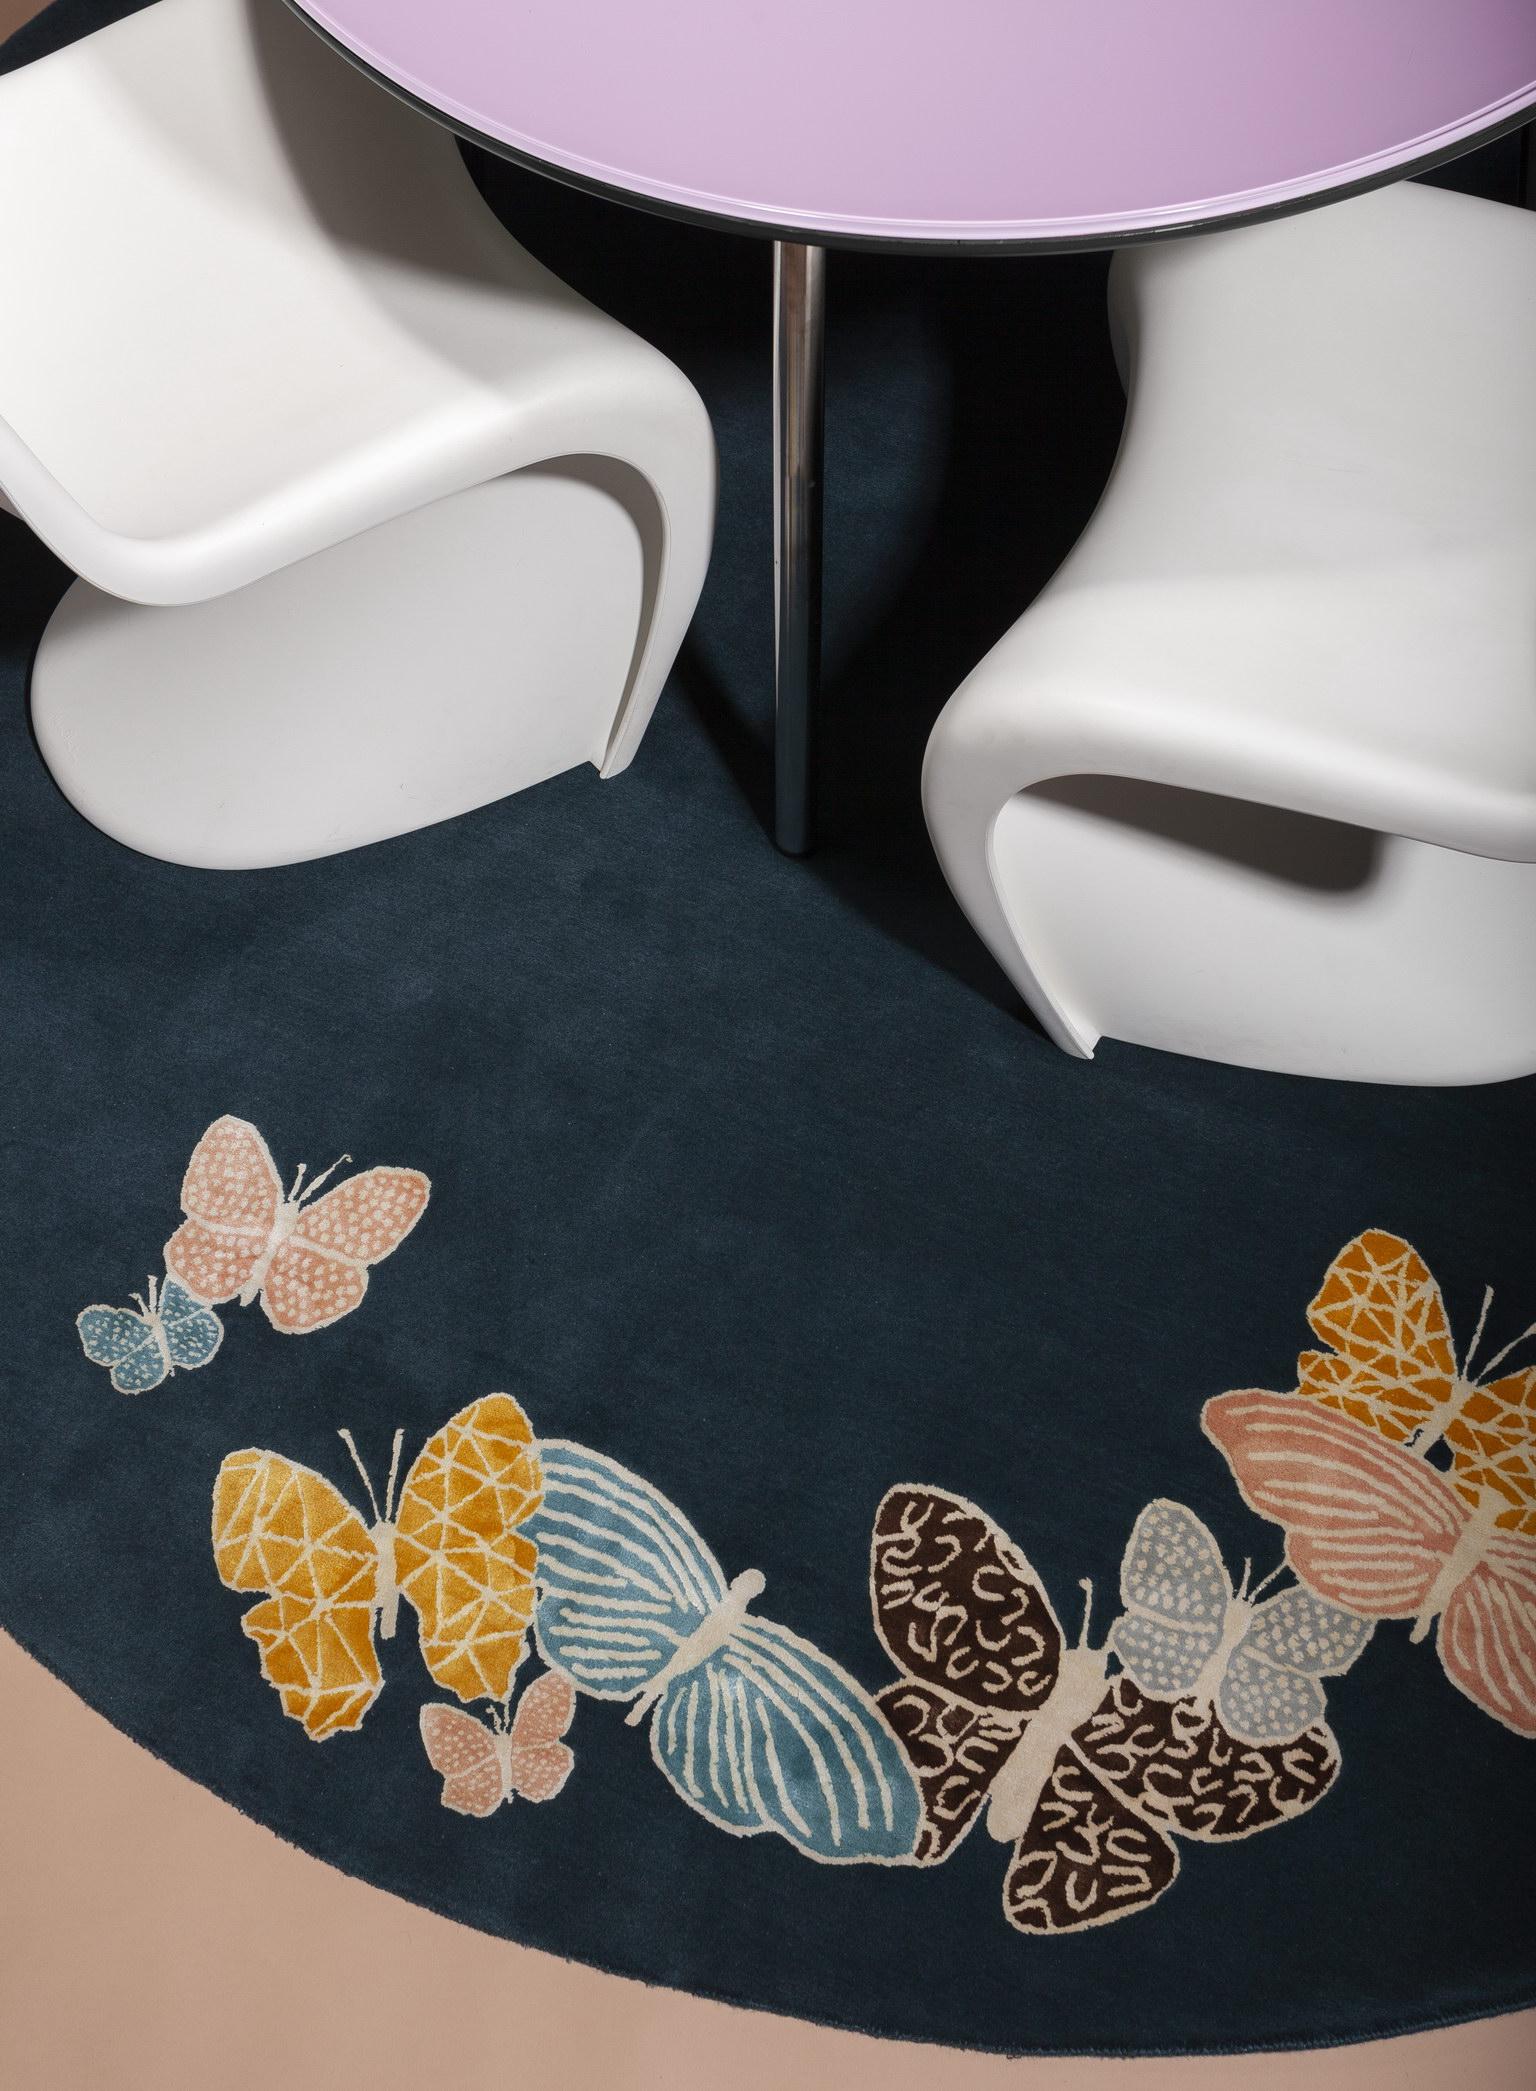 In Stock now!
Sergio Mannino Studio's collection of rugs is expanded with two new designs. (See storefront to look at other items).
Hand drawn butterflies seem to come out of the floor. The background is wool, while the butterflies are made with a